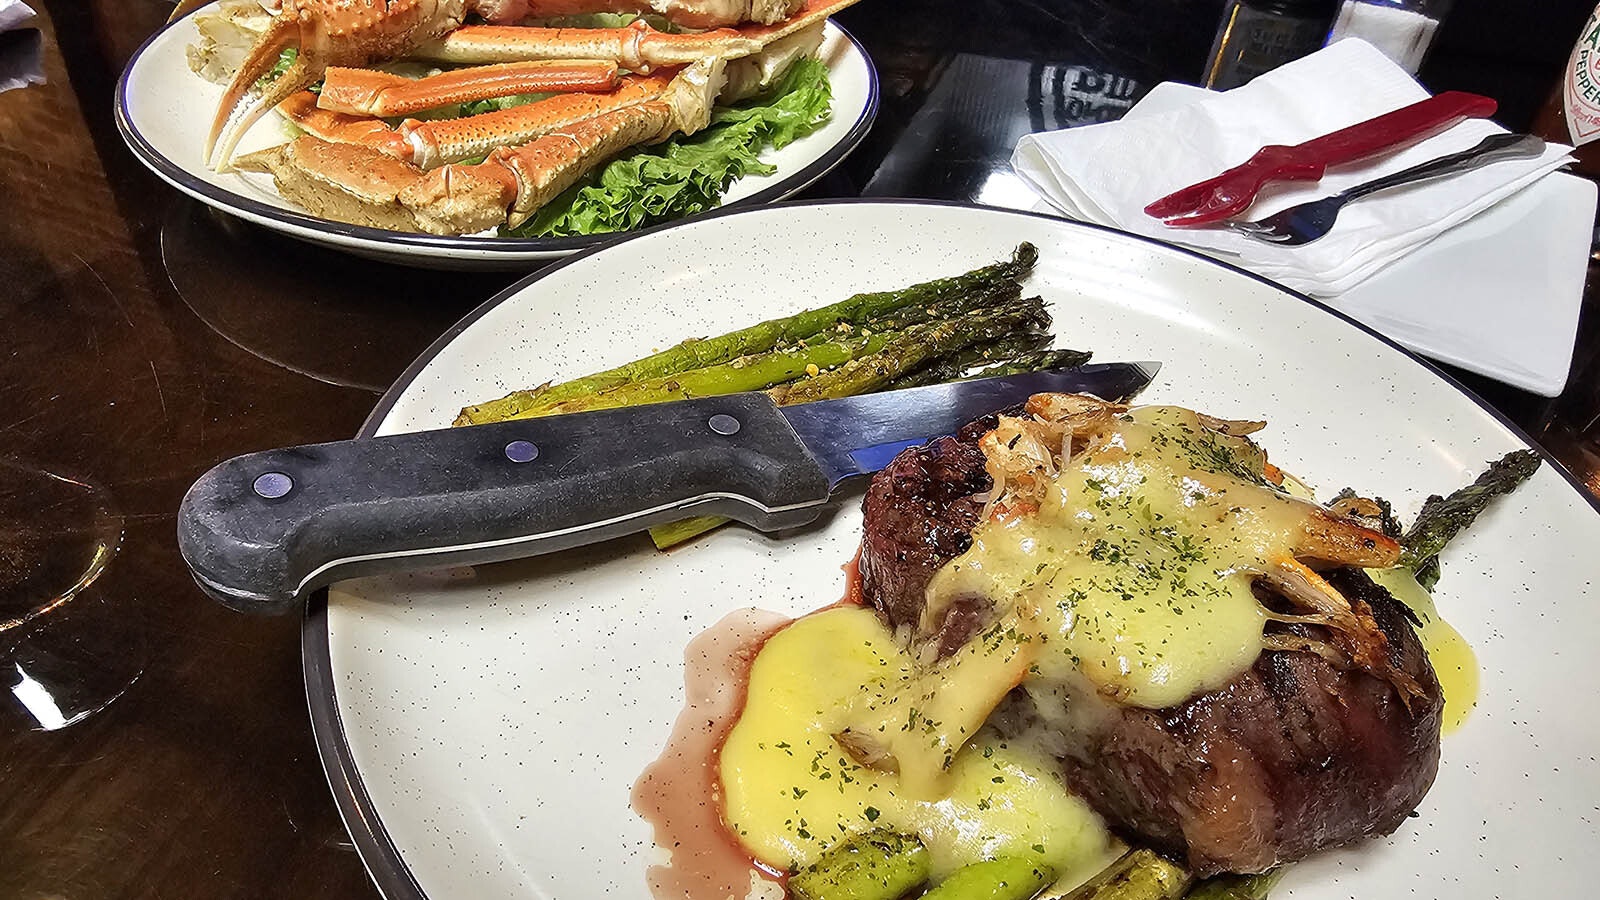 The Filet Oscar and the crab legs are new additions to One Eyed Buffalo's menu, after they moved into a larger space. They are just as delicious as they look.